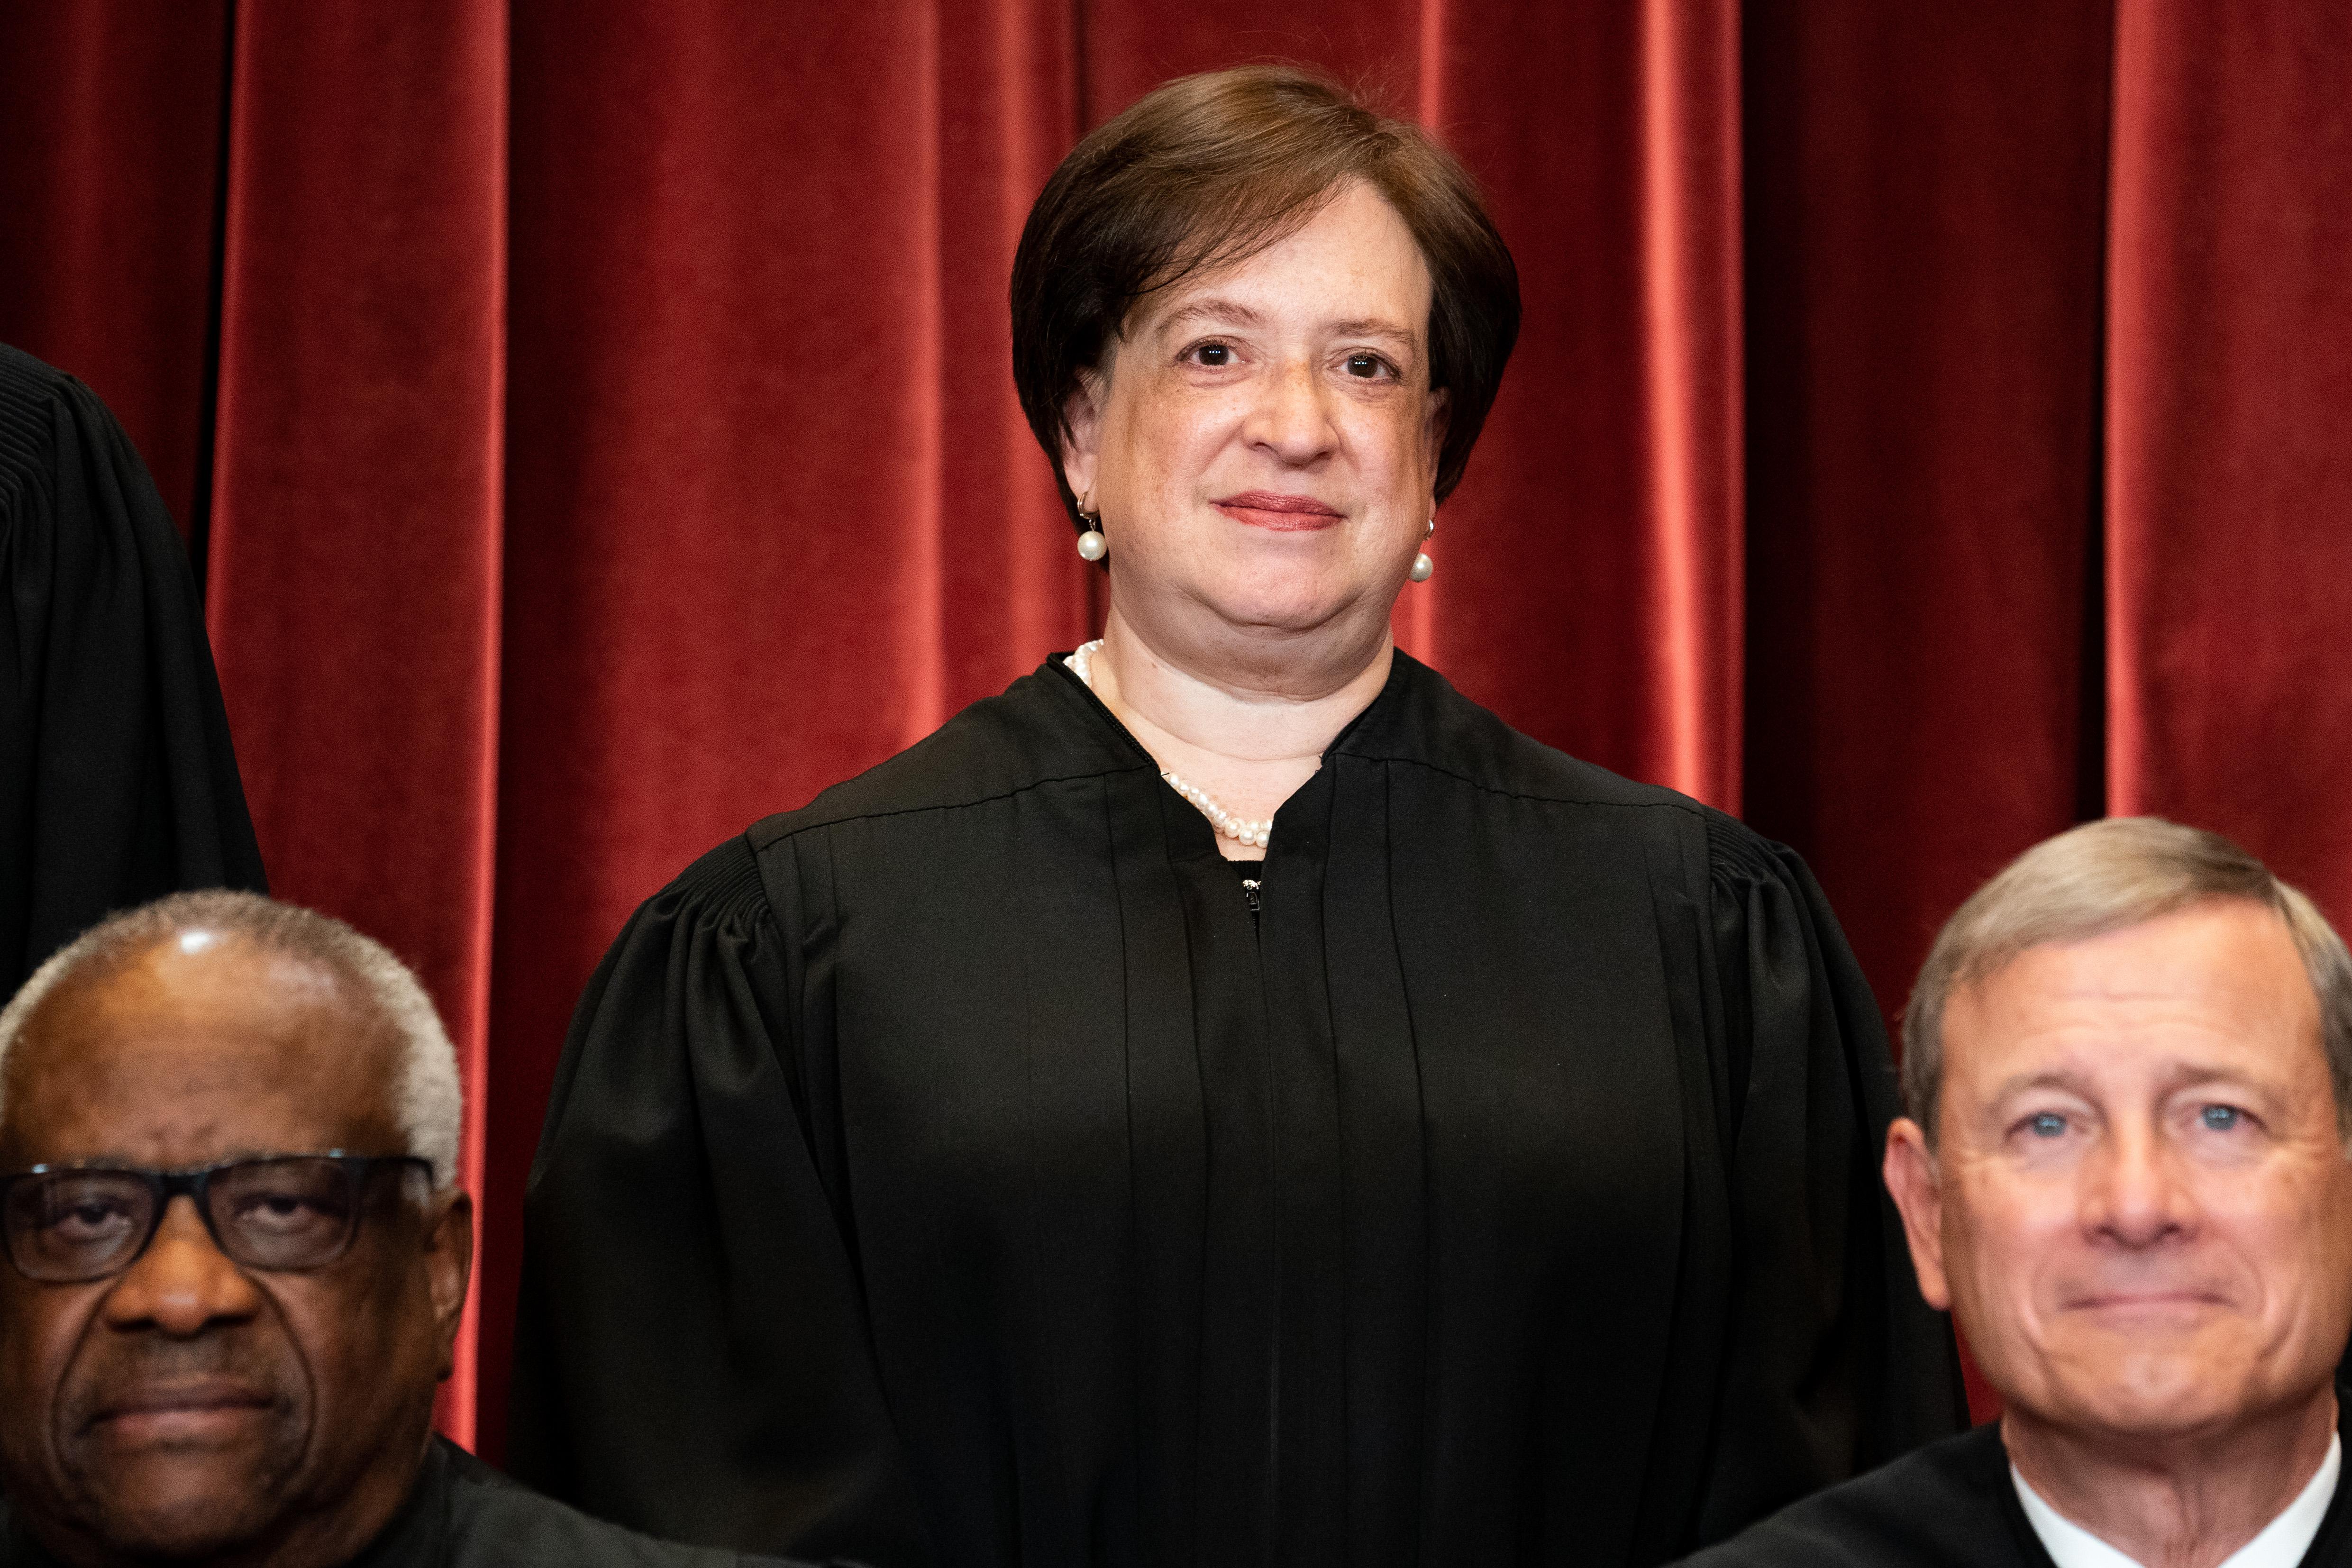 Elena Kagan, Clarence Thomas, and John Roberts in their robes, all posing for the Supreme Court group photo.